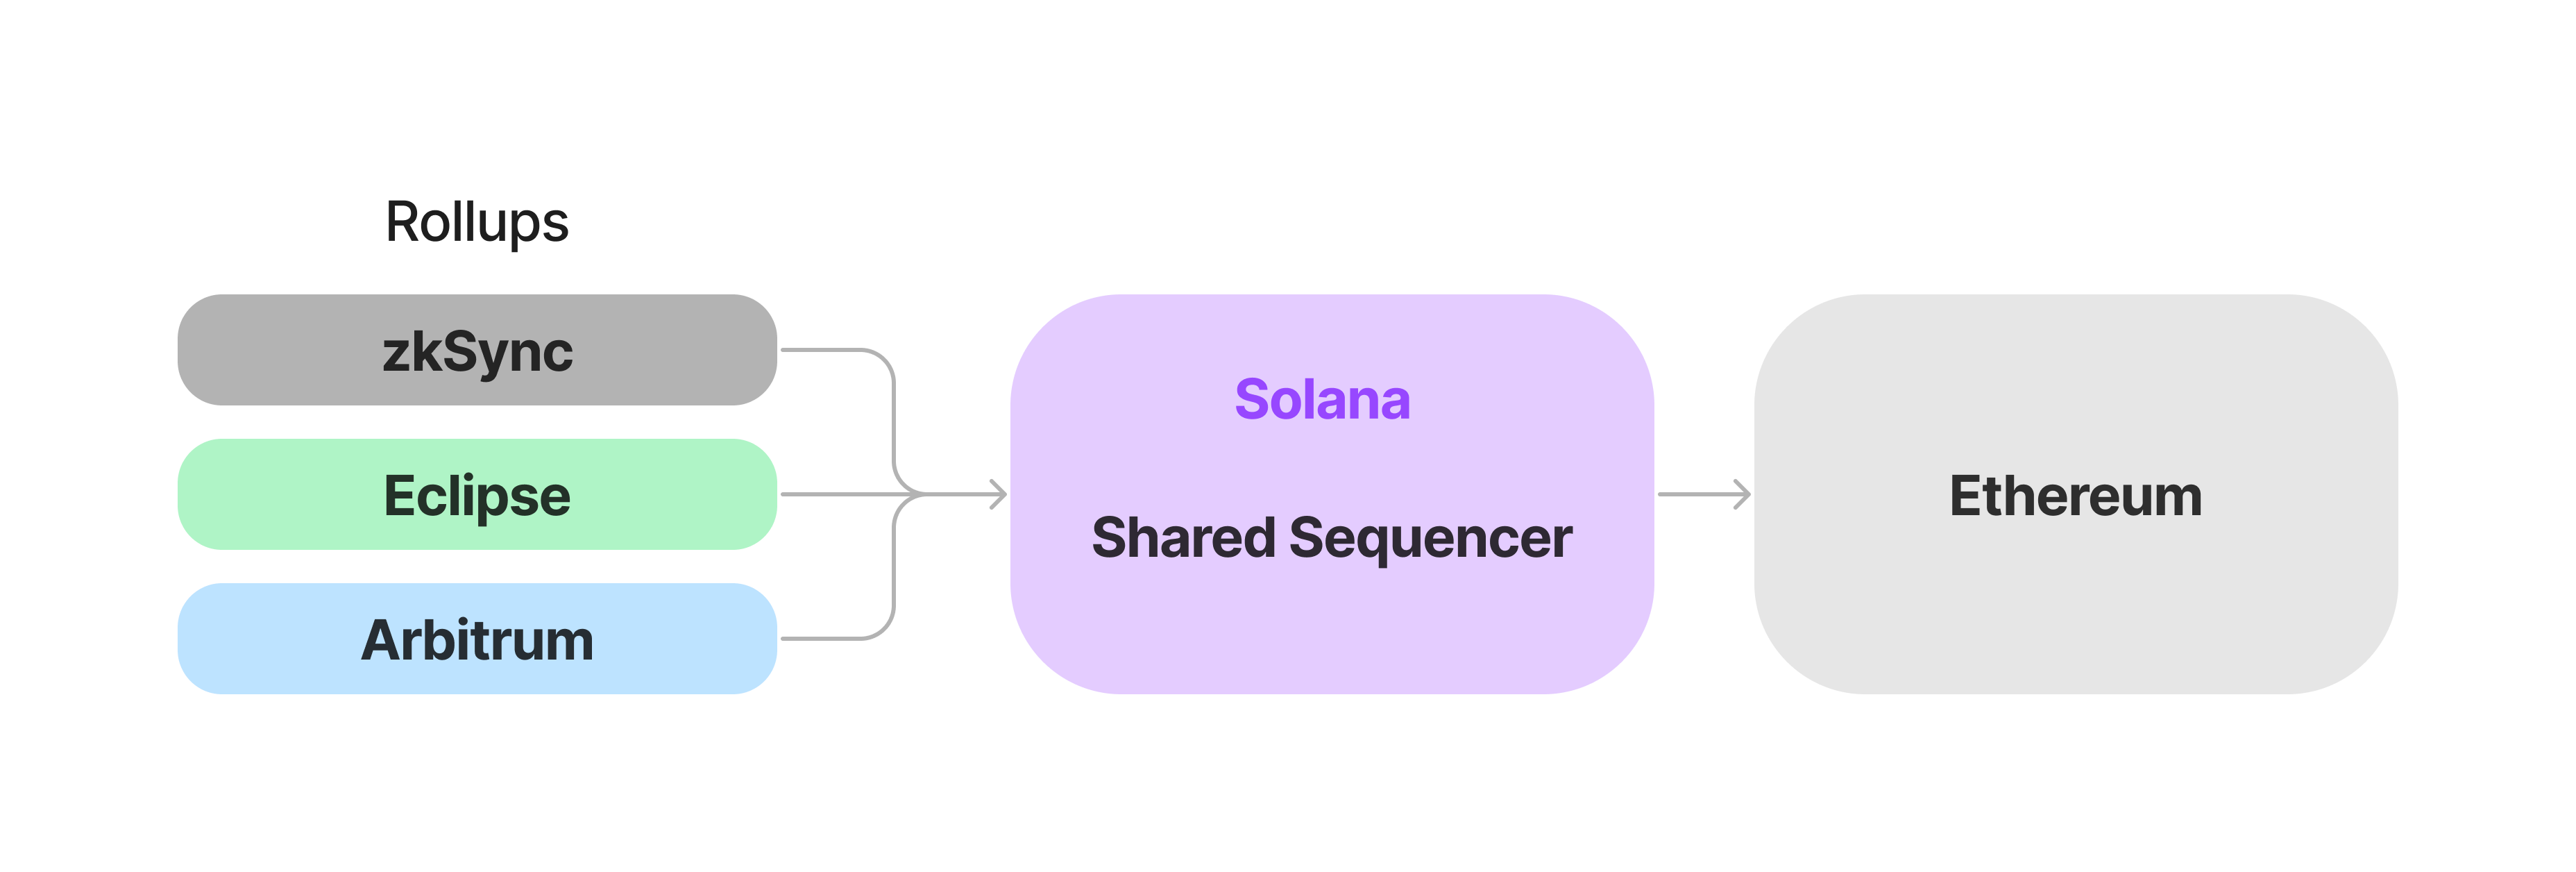 Figure 3. Solana as Shared Sequencer